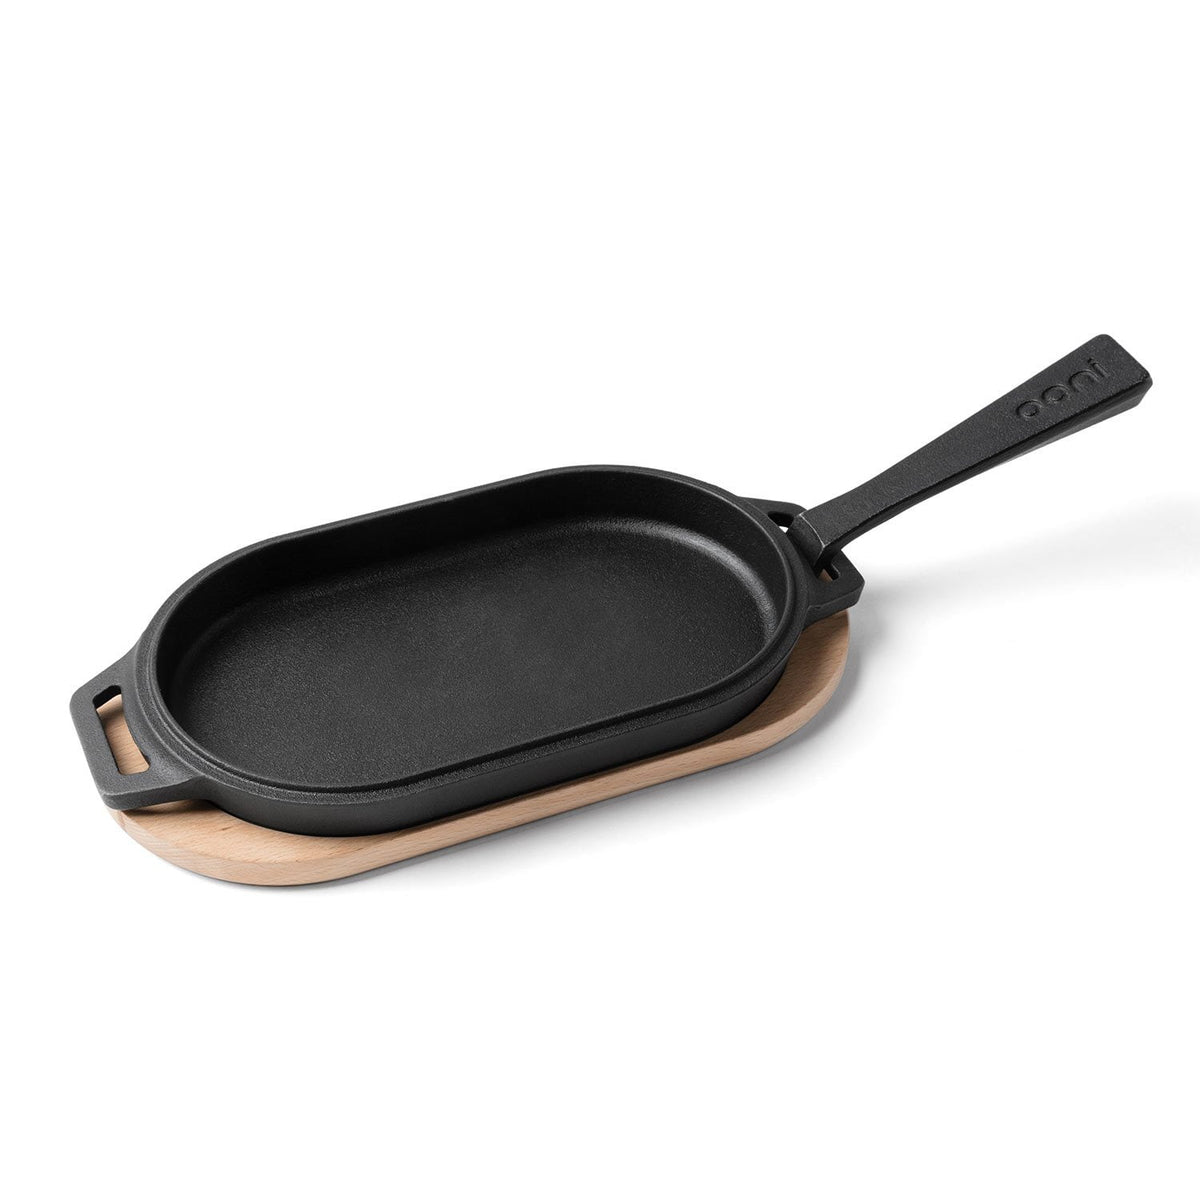 Home-Complete 14 Cast Iron Pizza Pan, Skillet Kitchen Cookware 